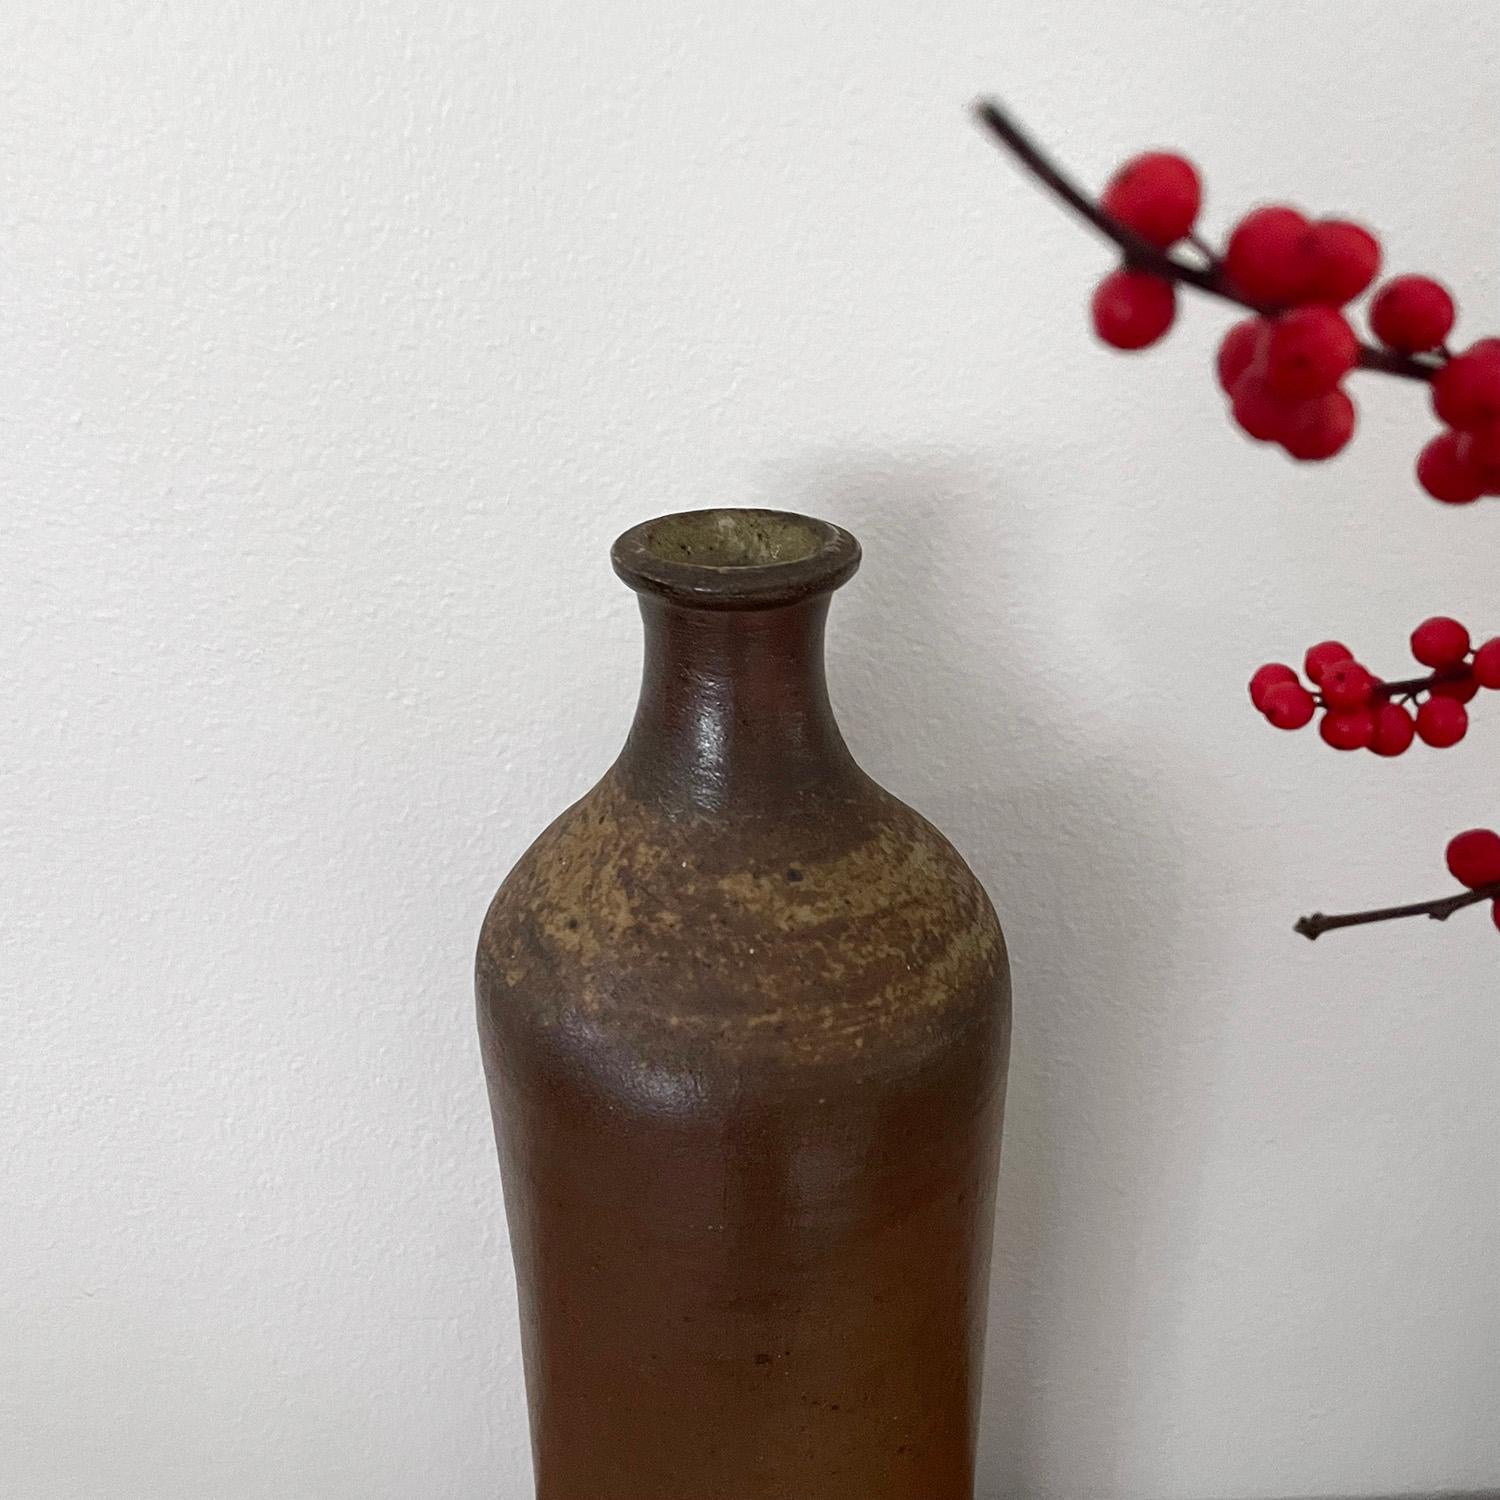 French Ceramic Stoneware Bottle Vase In Good Condition For Sale In Los Angeles, CA